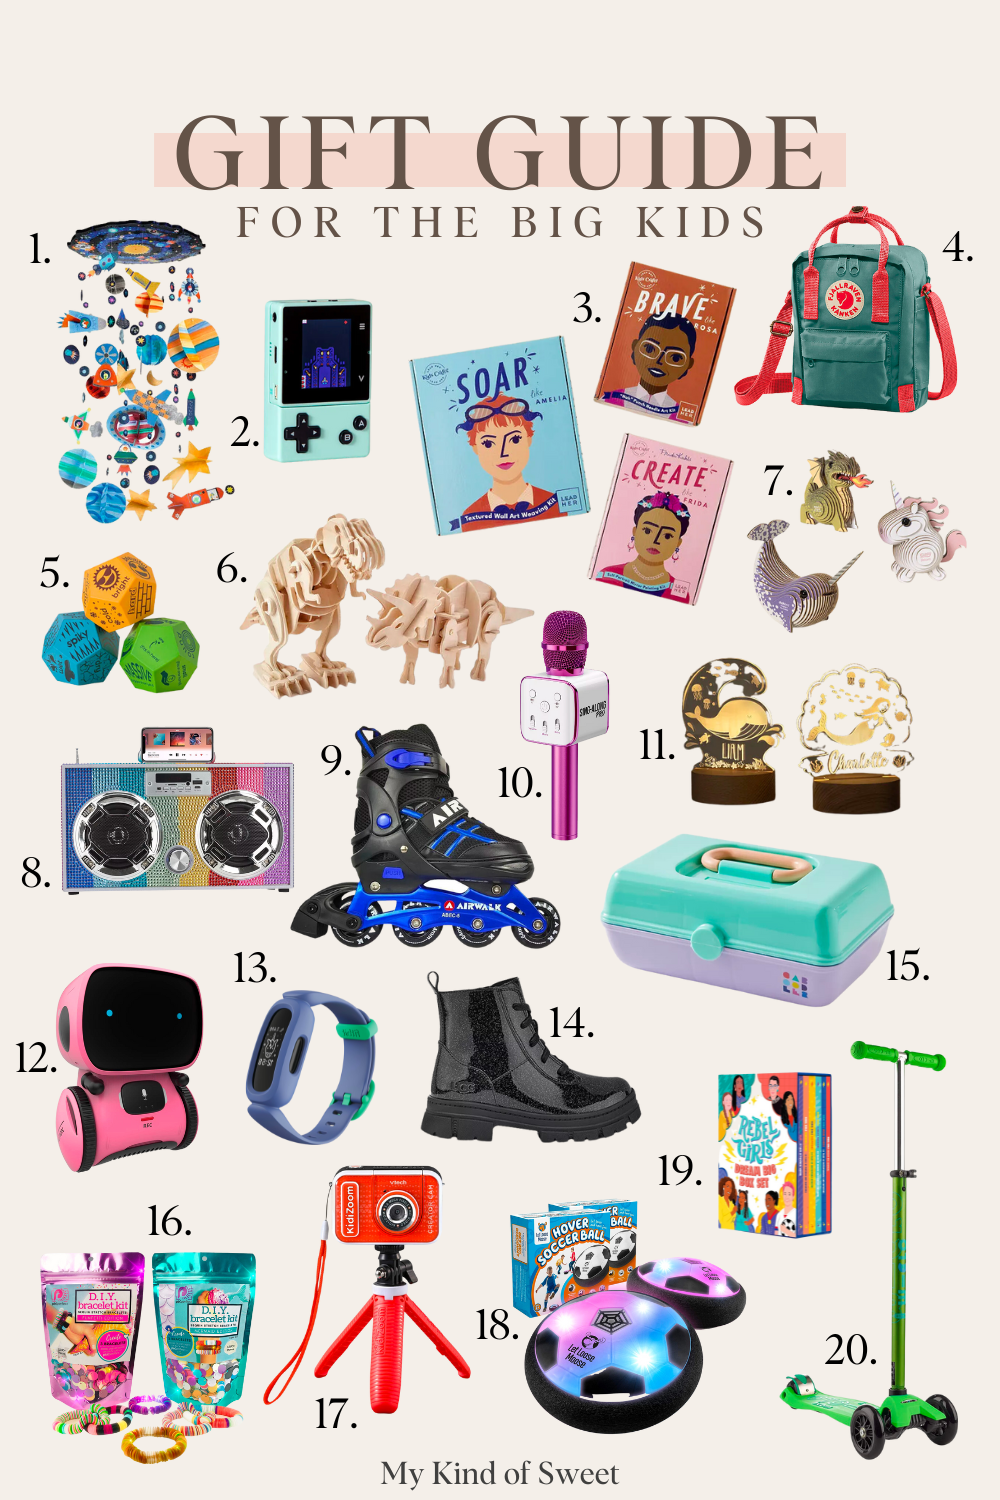 Gift Ideas: Games for Kids Gift Guide 2023